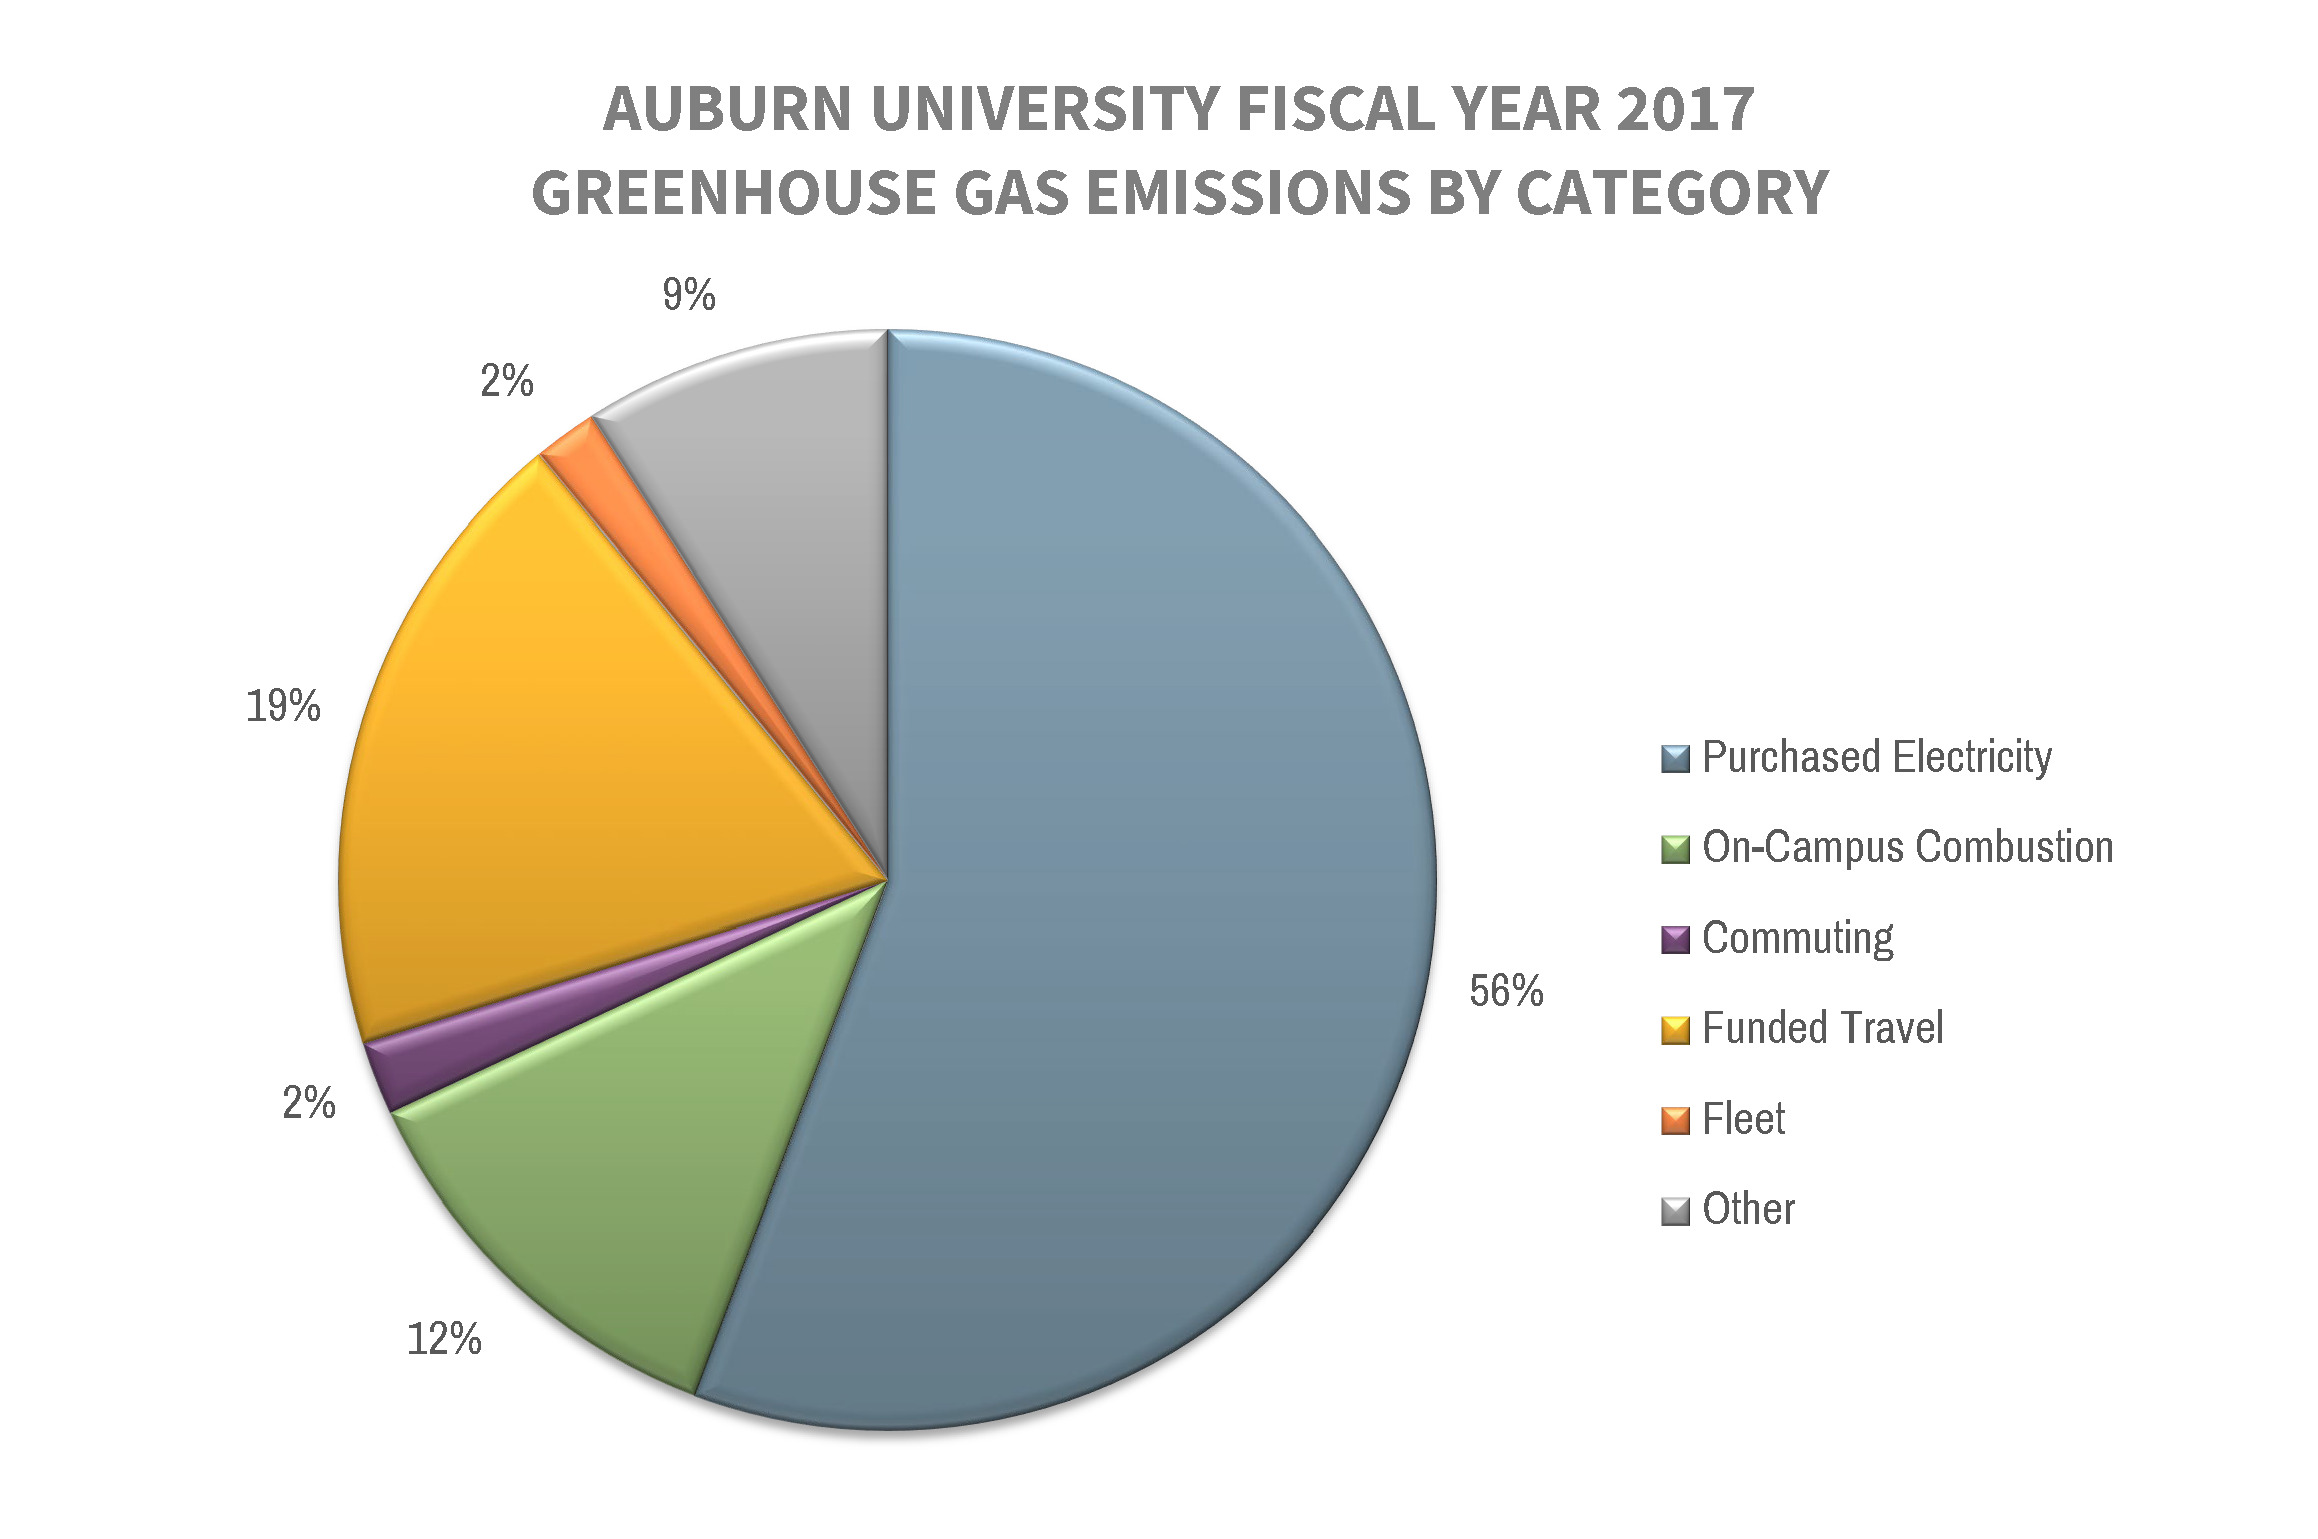 Graph depicting fiscal year 2017 greenhouse gas emissions for Auburn University by emission category.